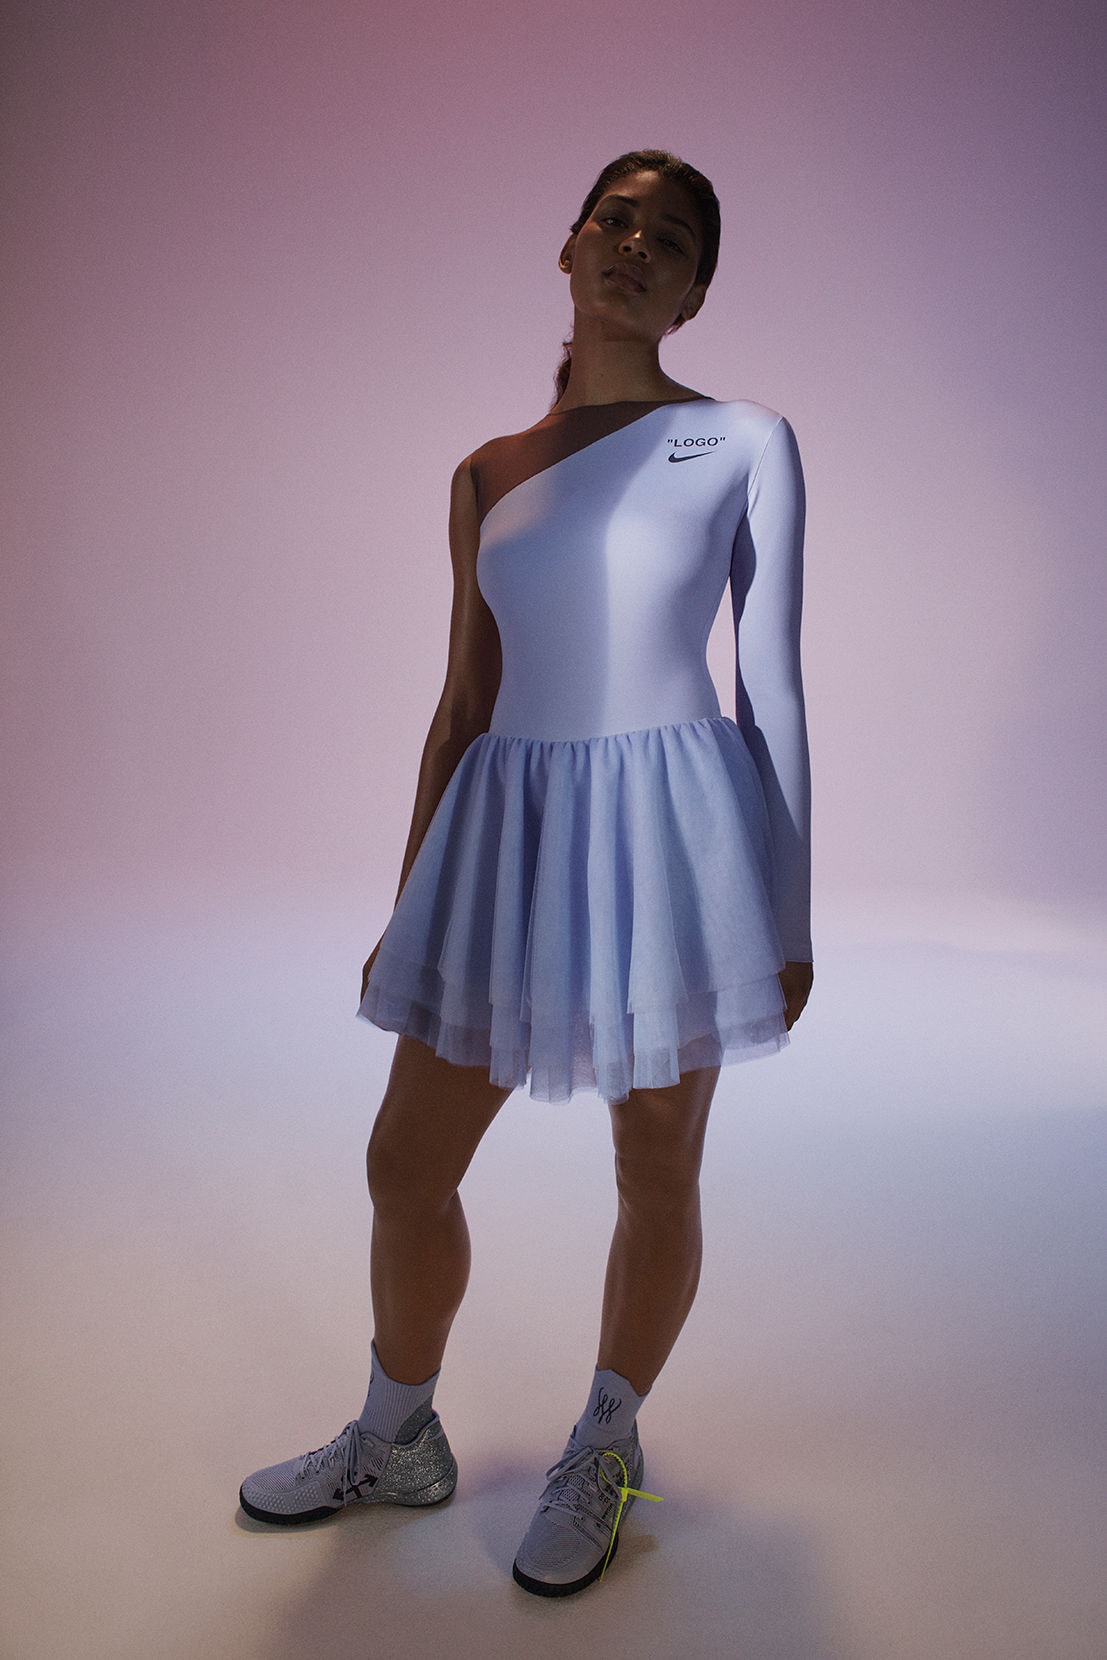 Virgil Abloh Serena Williams Off-White Nike QUEEN Collection Tulle Dress Blue NikeCourt Flare 2 PE Silver